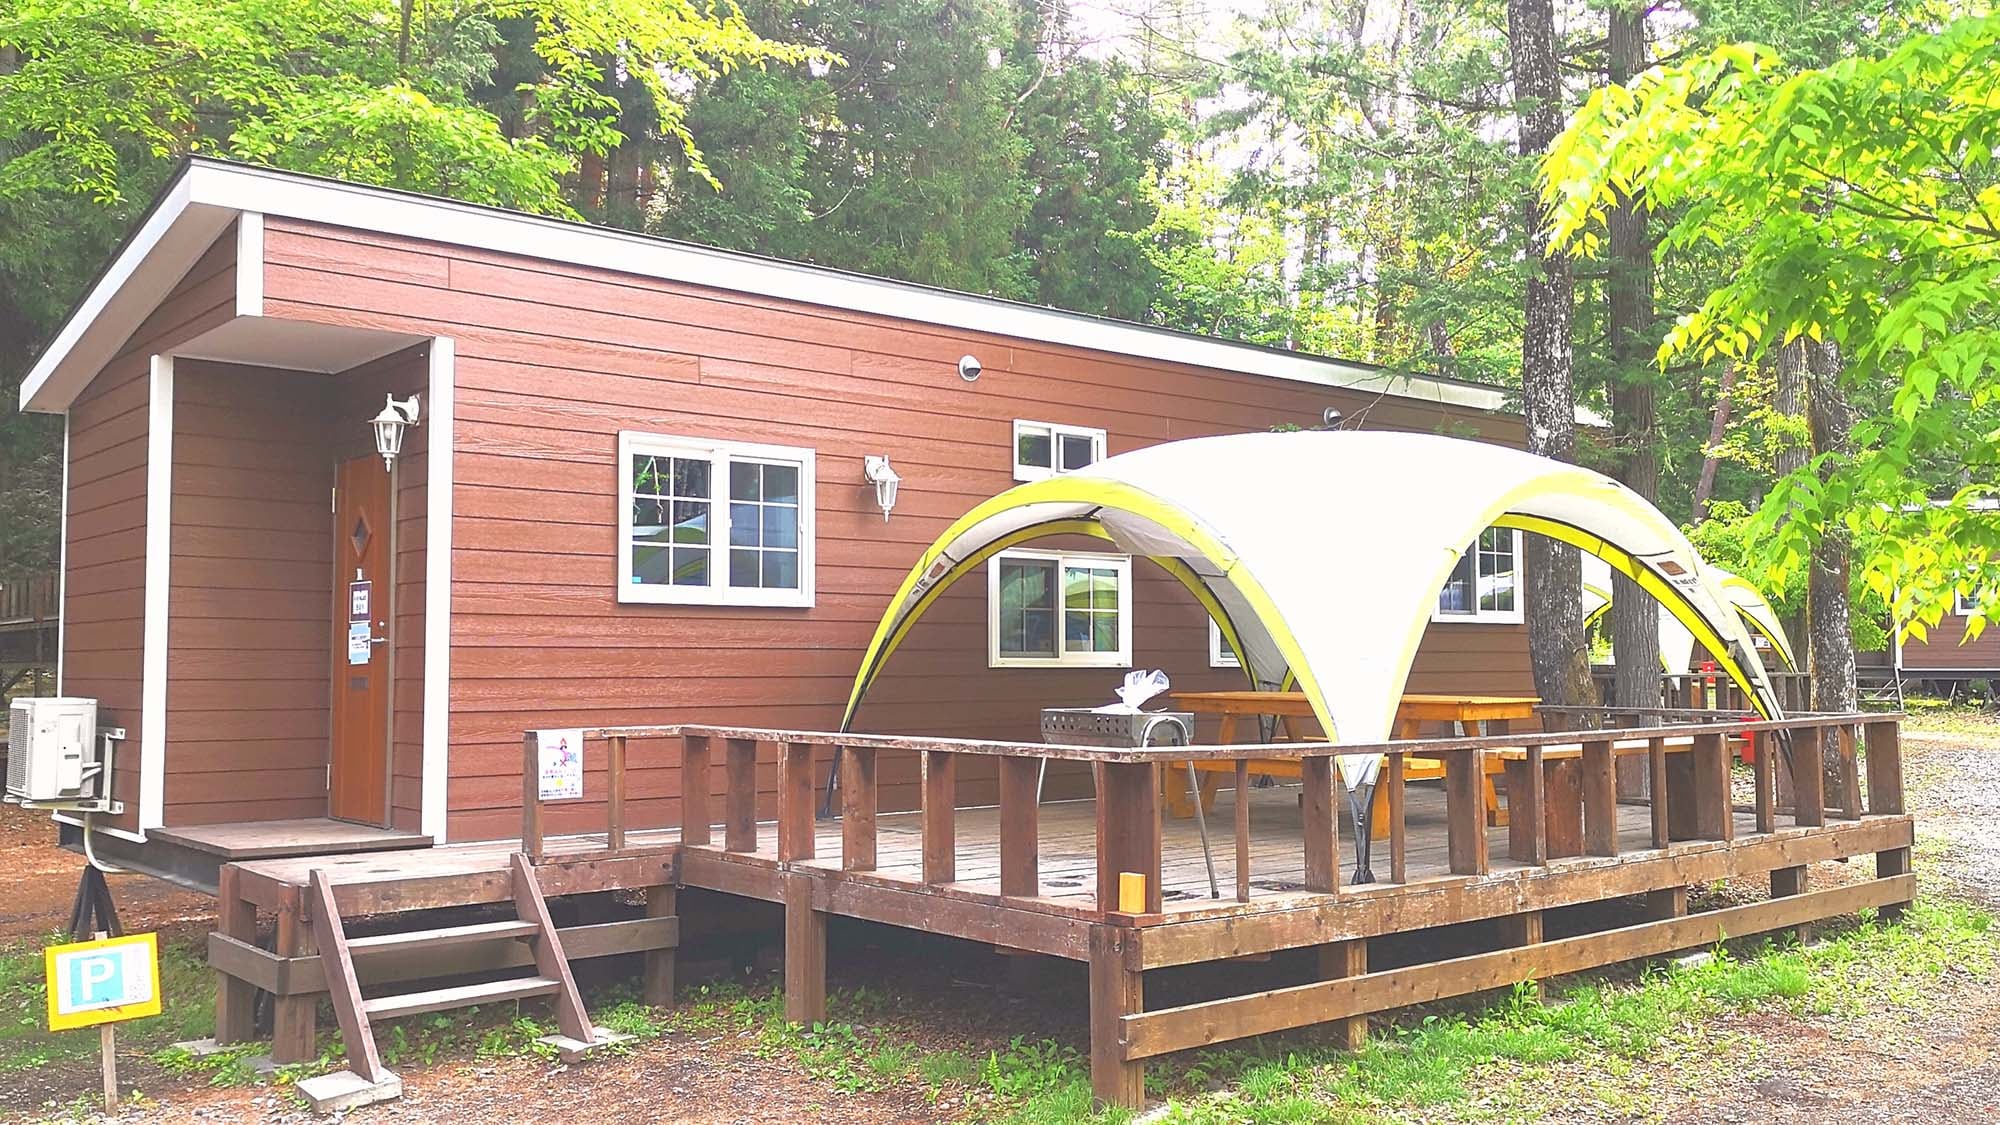 ・ The trailer house "B-B Palace" is fully equipped and you can enjoy camping empty-handed.